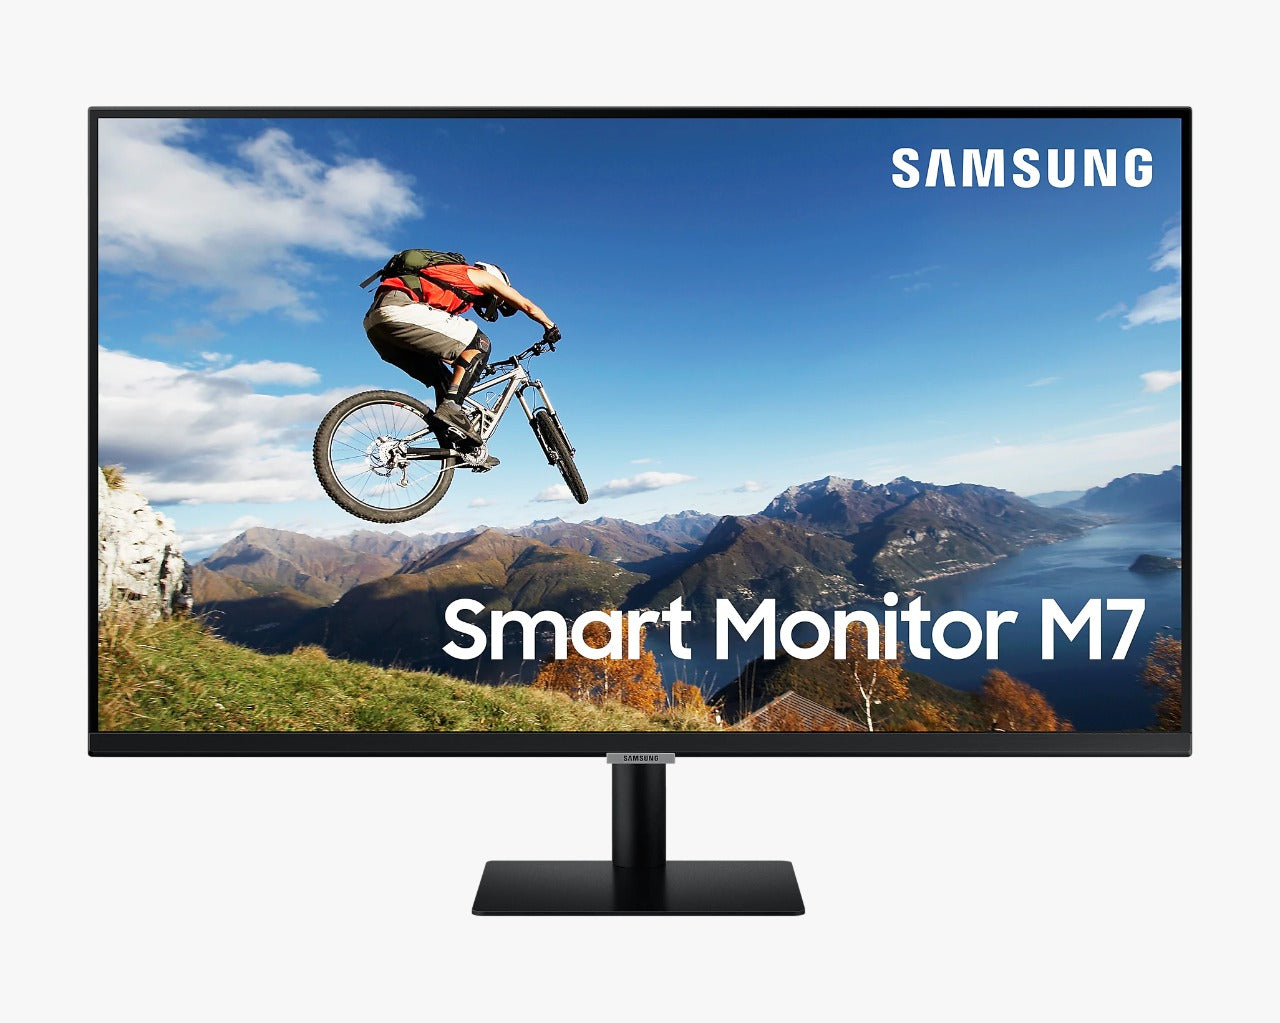 Samsung 81.3cm (32") Smart Monitor with World’s 1st Do-It-All Screen